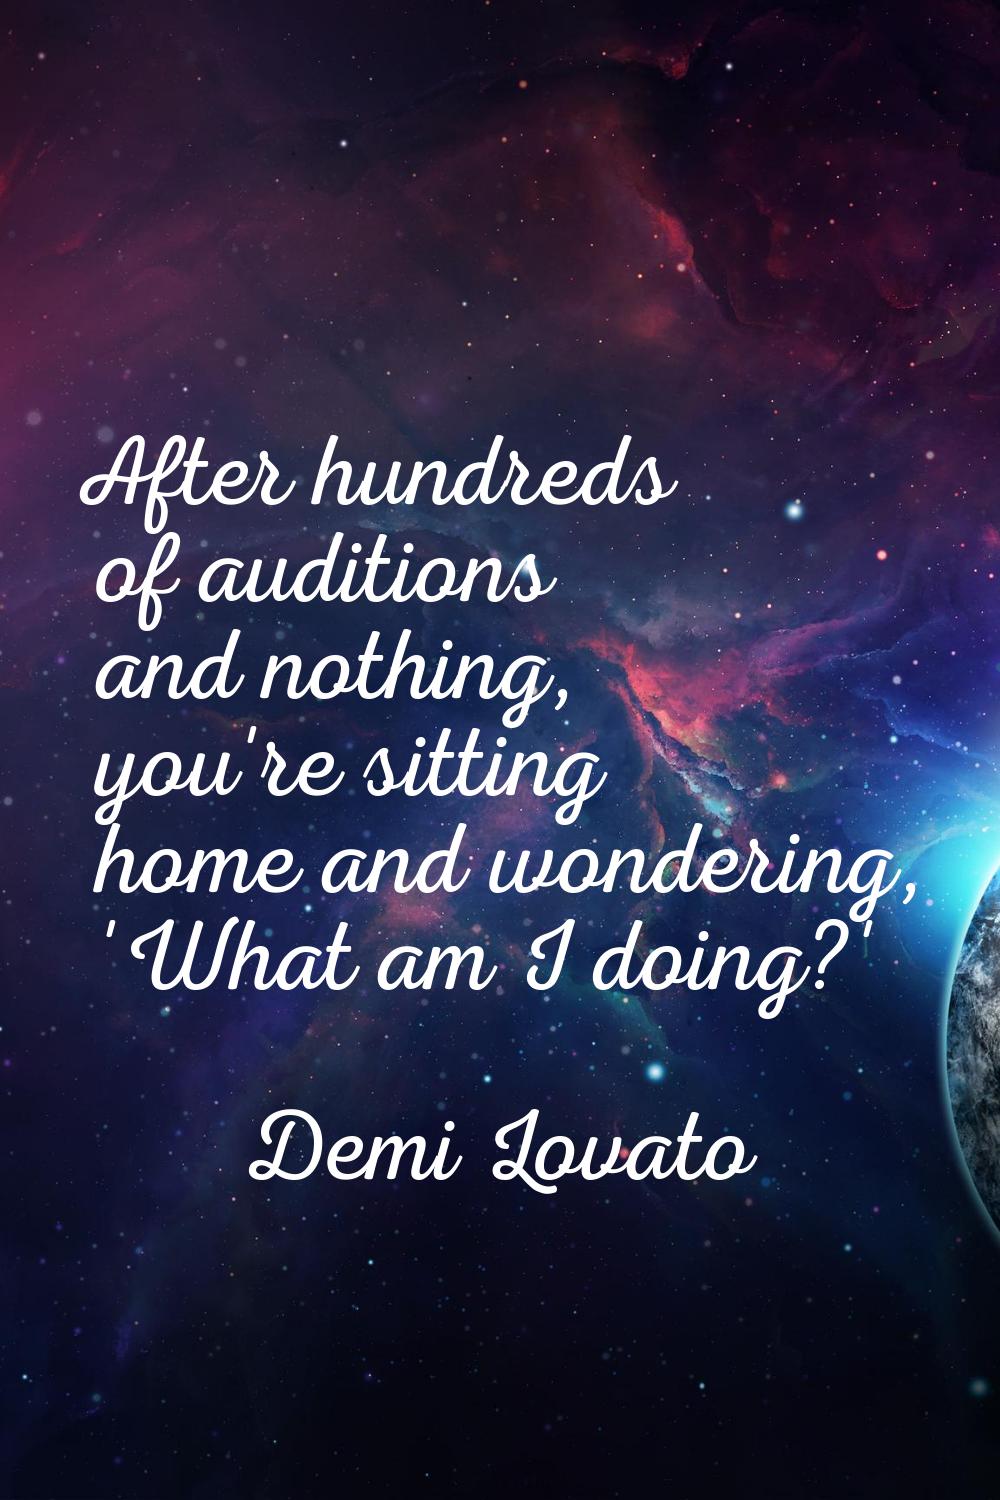 After hundreds of auditions and nothing, you're sitting home and wondering, 'What am I doing?'